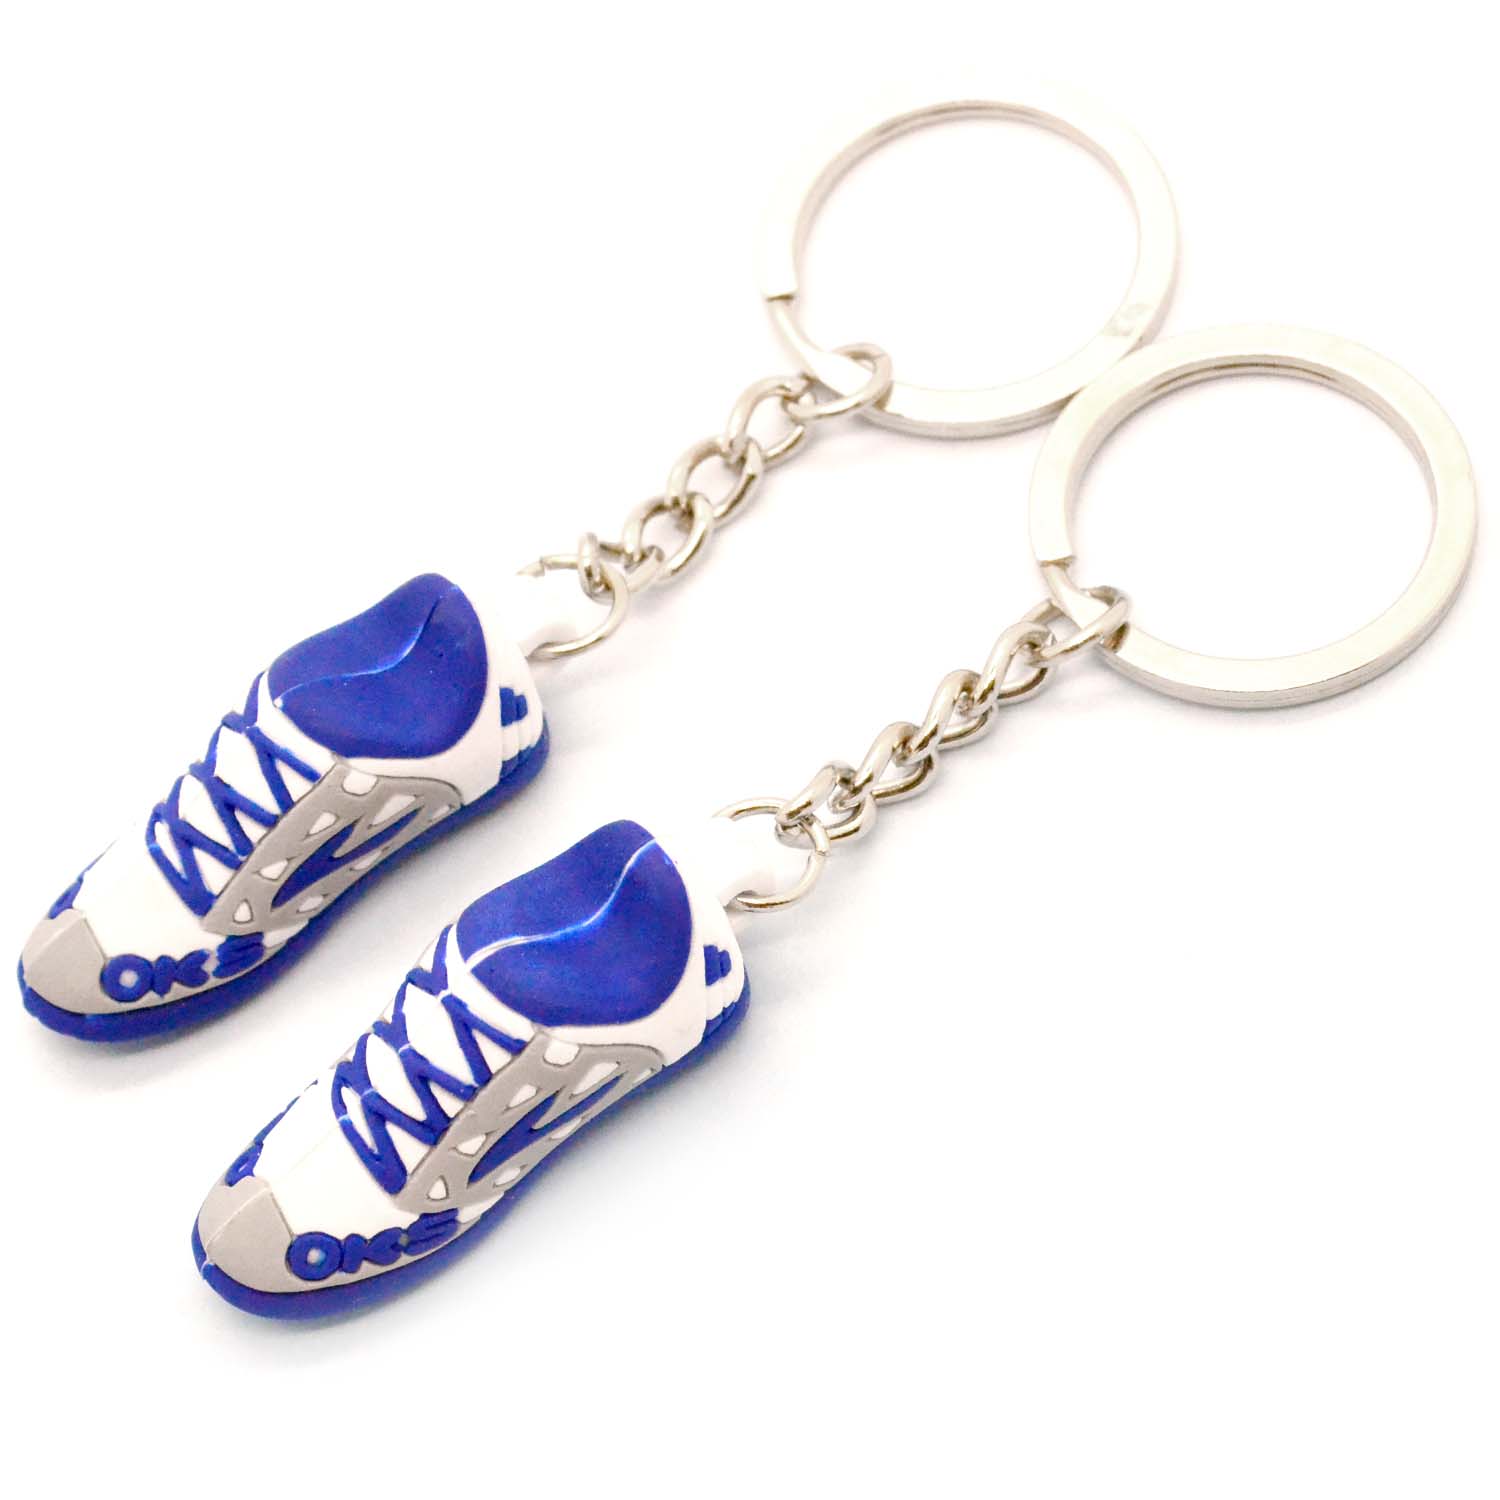 Customized 3D Shoe Shape Keychain PVC Rubber Keyring Sport Promotional Gifts